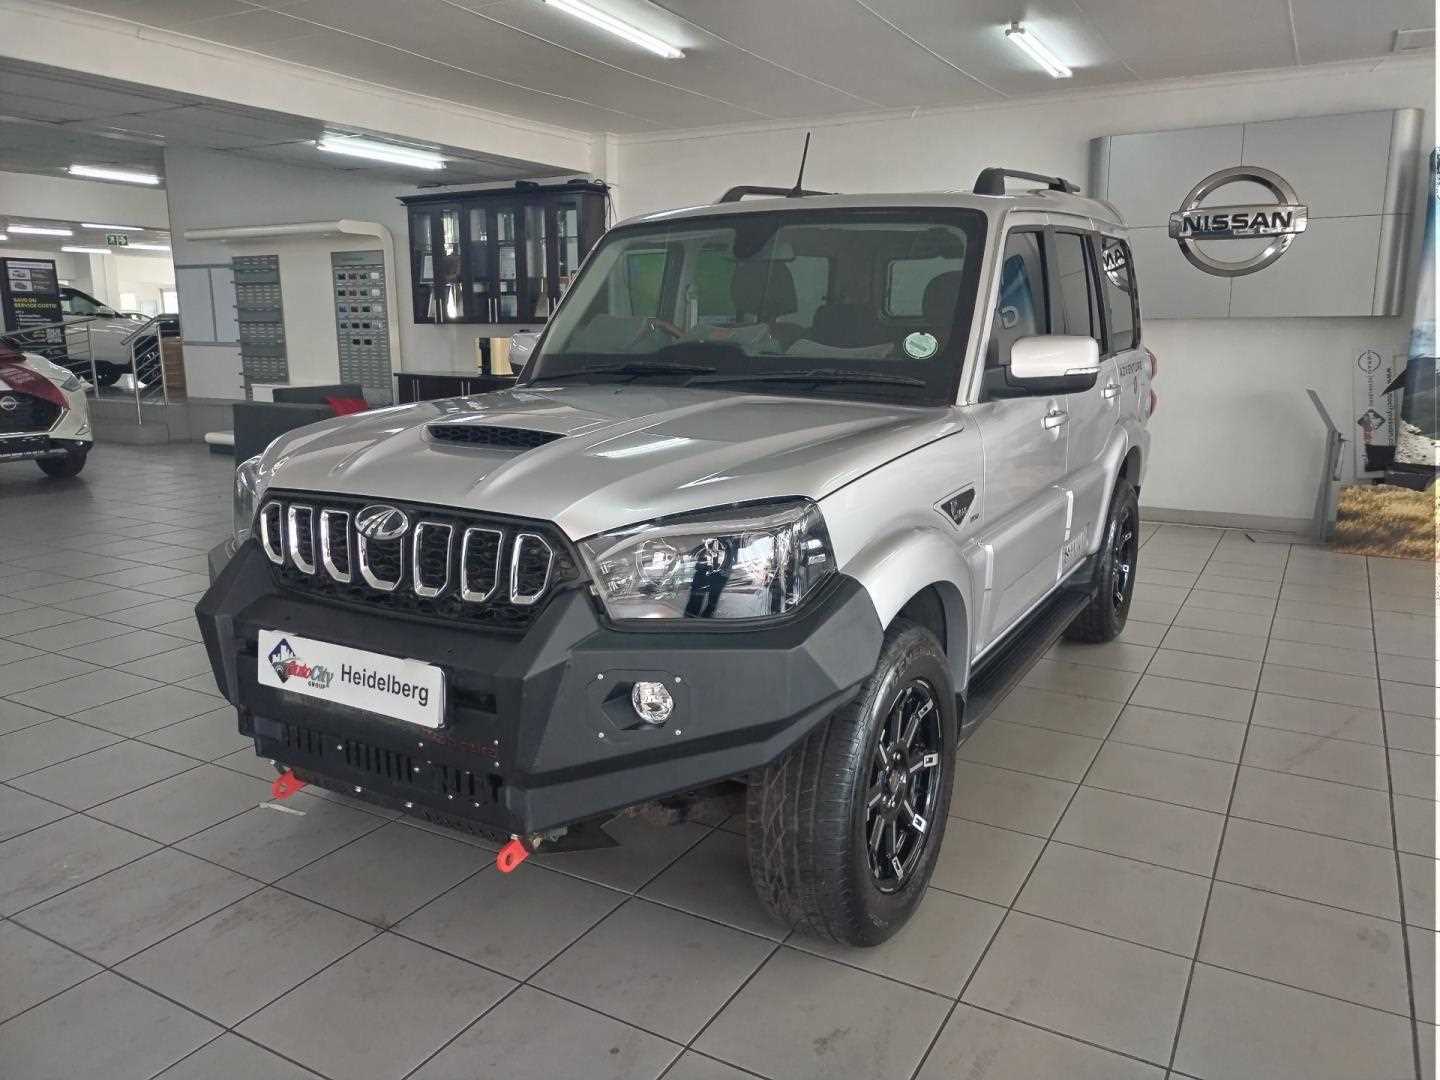 Mahindra SCORPIO 2.2TD 4X4 ADVENTURE 103KW (S11) for Sale in South Africa